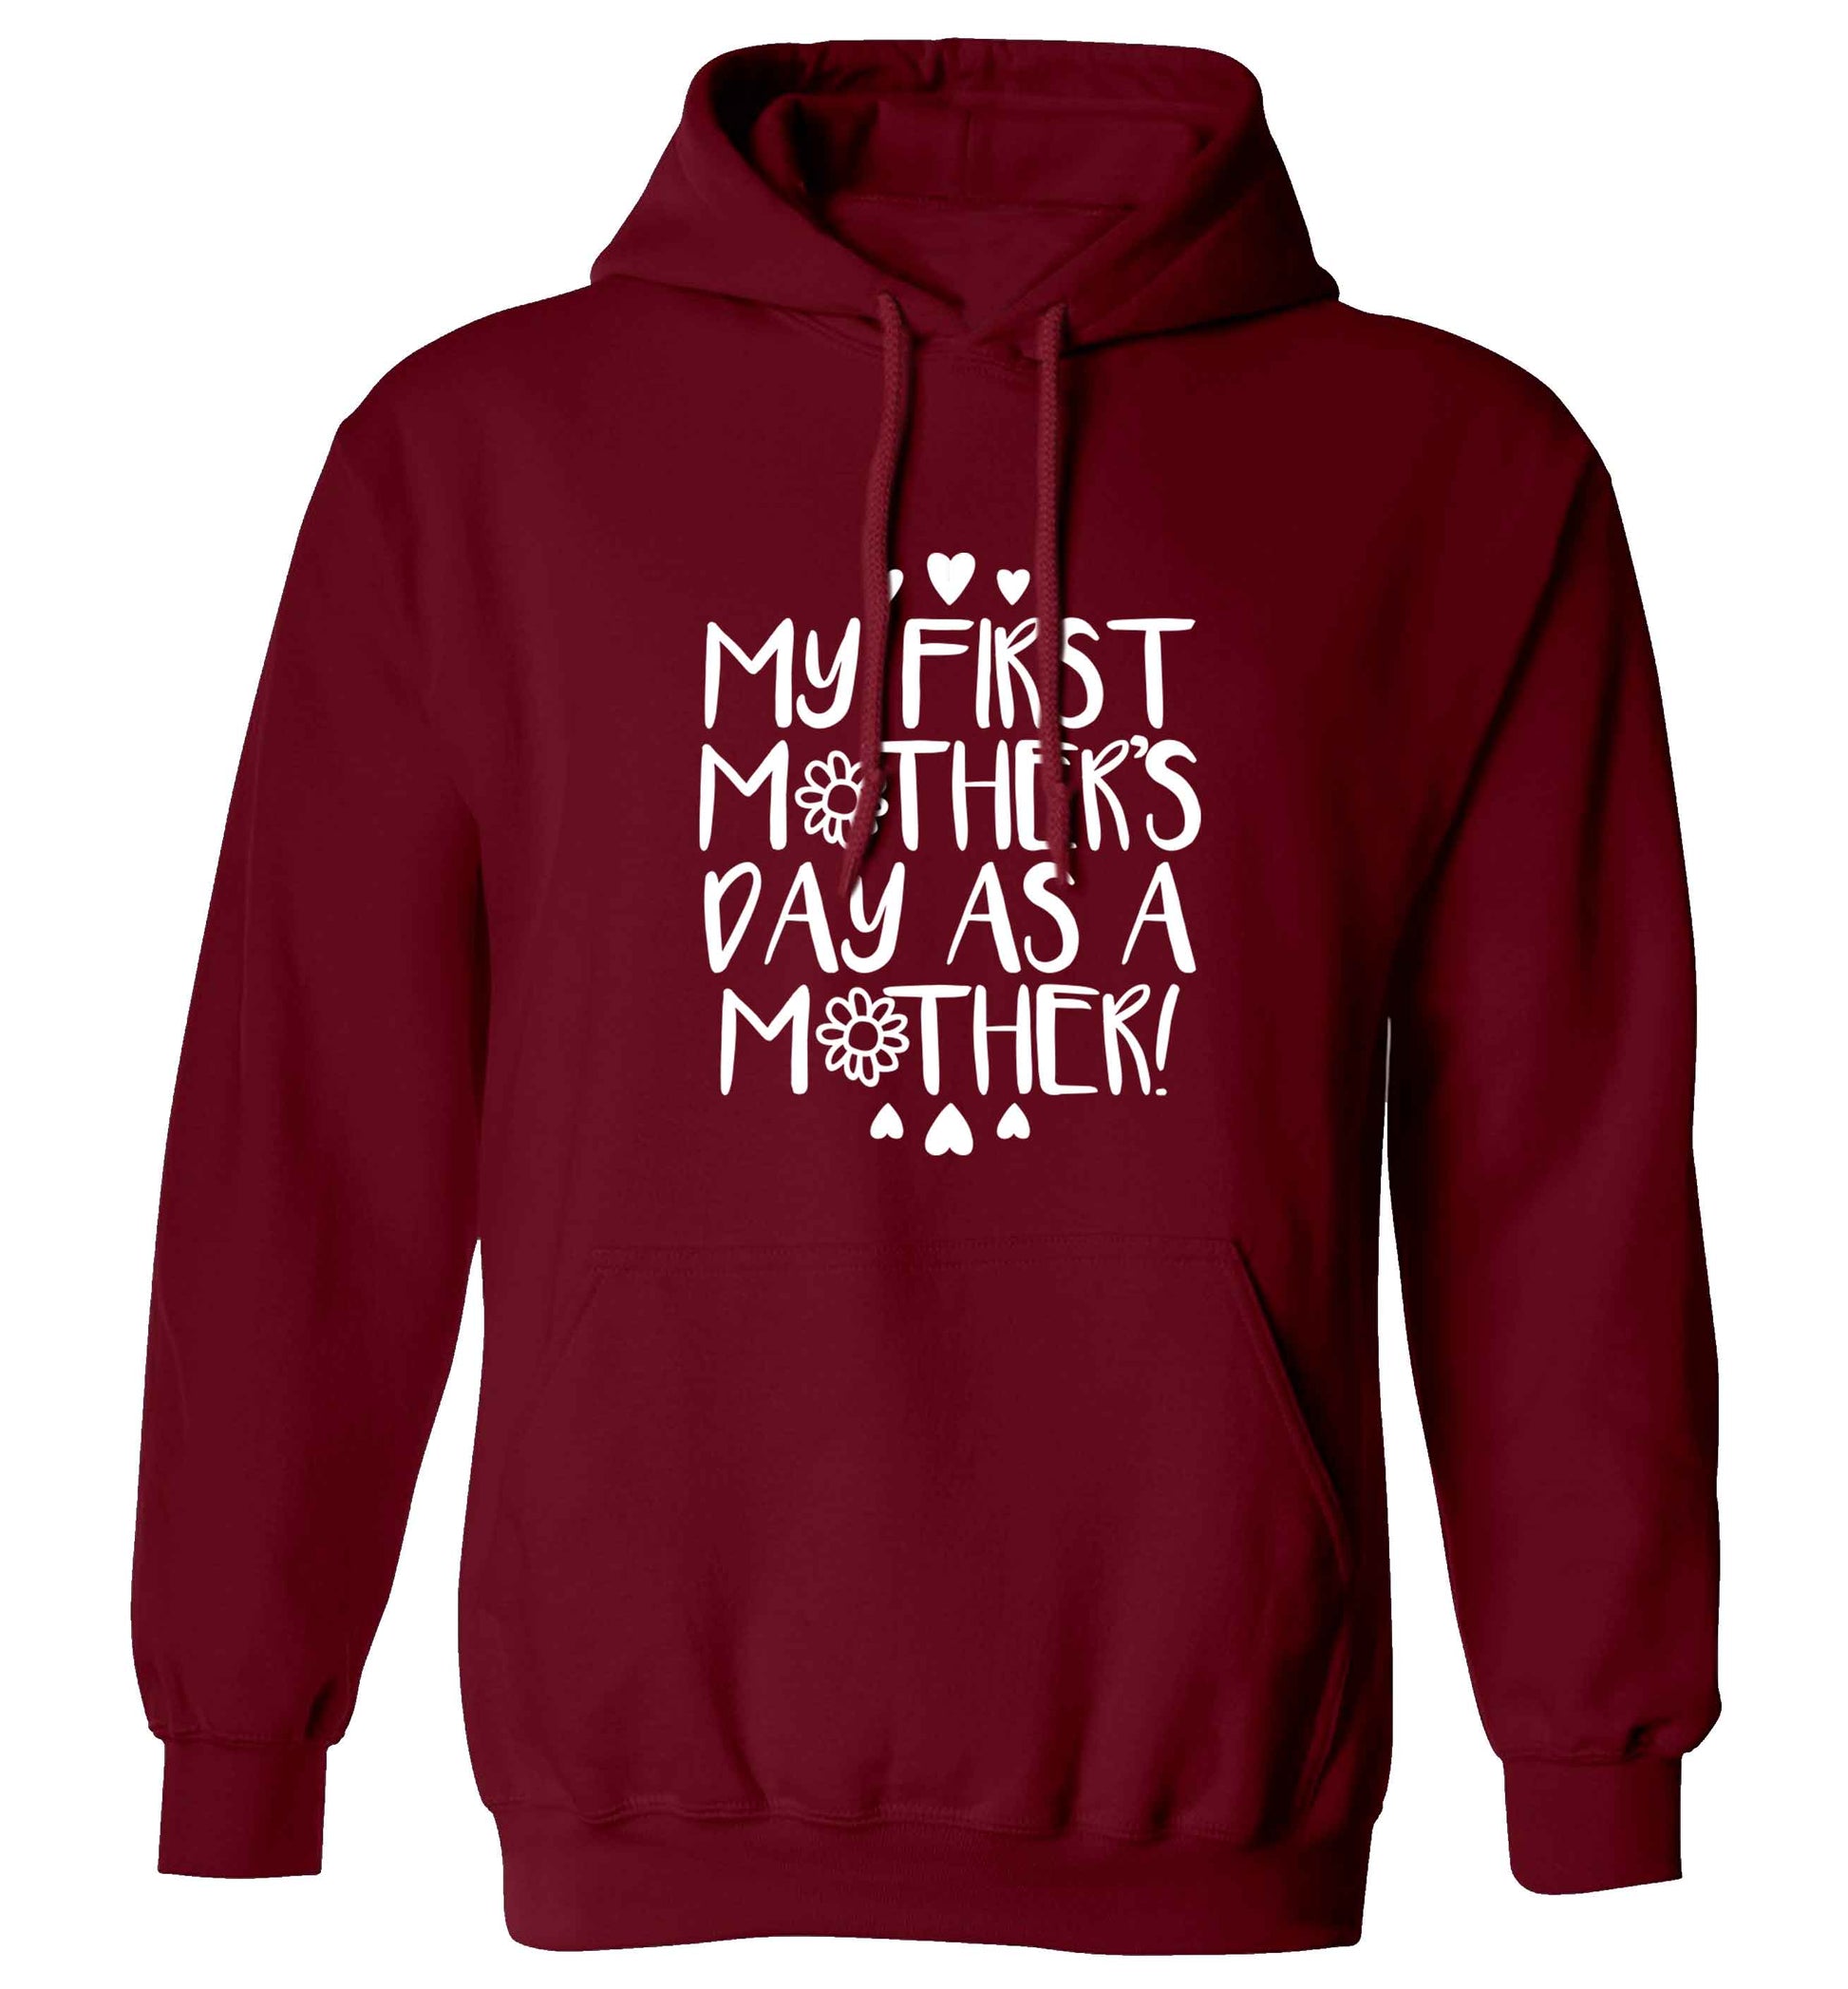 It's my first mother's day as a mother adults unisex maroon hoodie 2XL